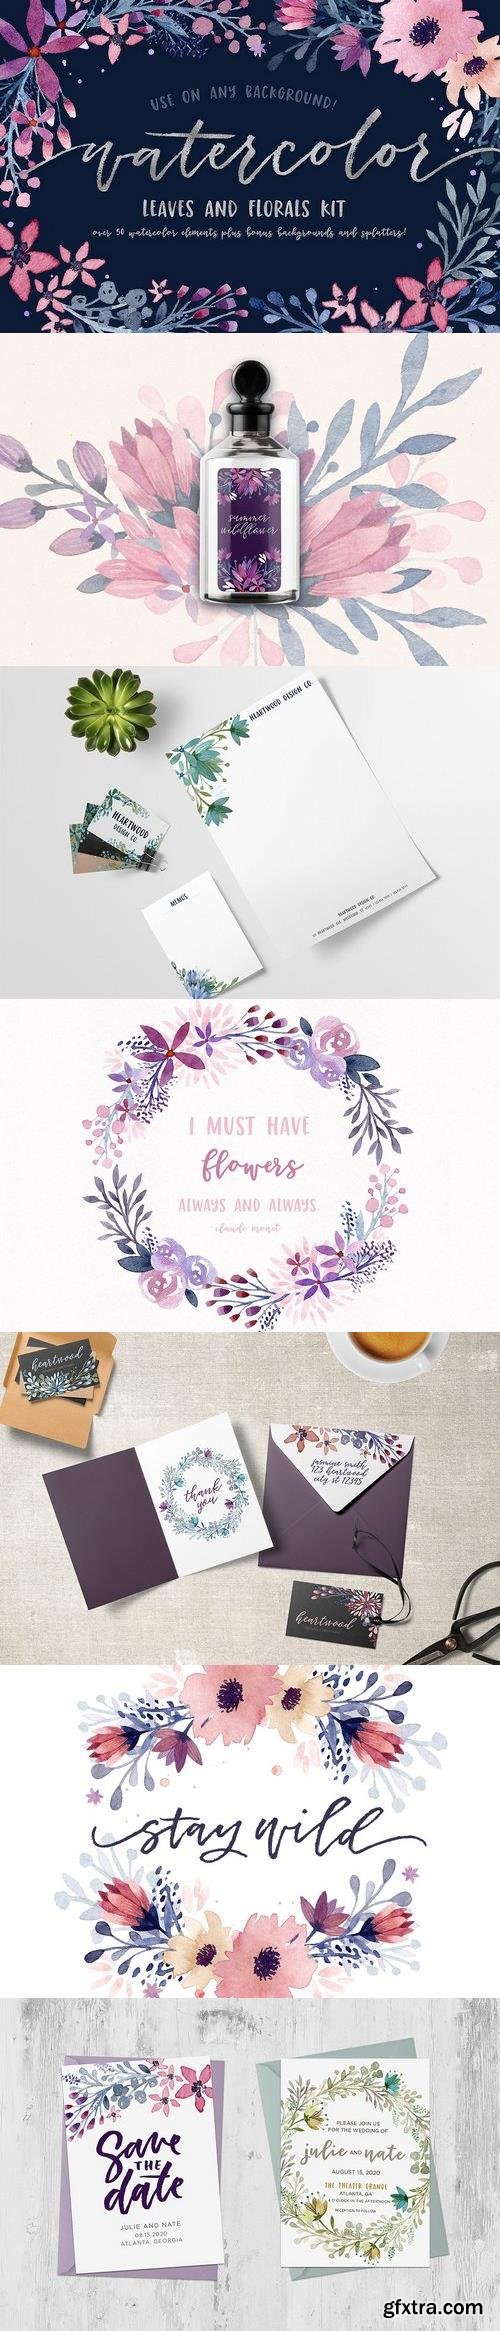 CM - Watercolor Leaves and Florals Kit 1485476